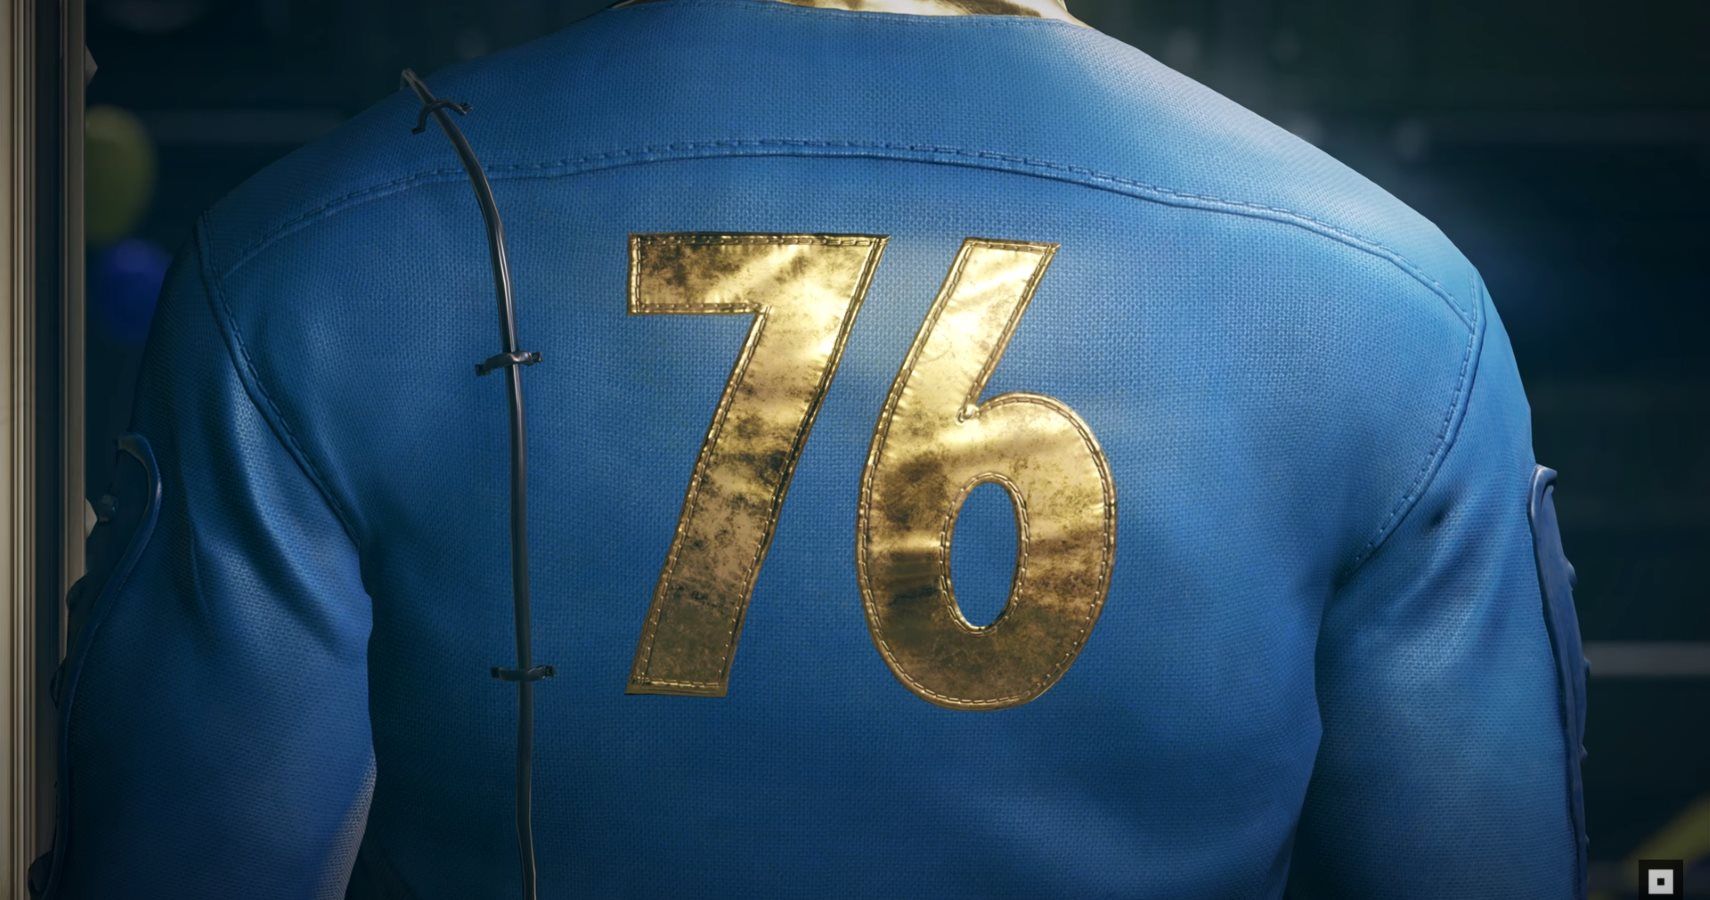 Fallout 76 Is Bethesda's Next Game, Rumors Say It Will Be At Least Partly Multiplayer